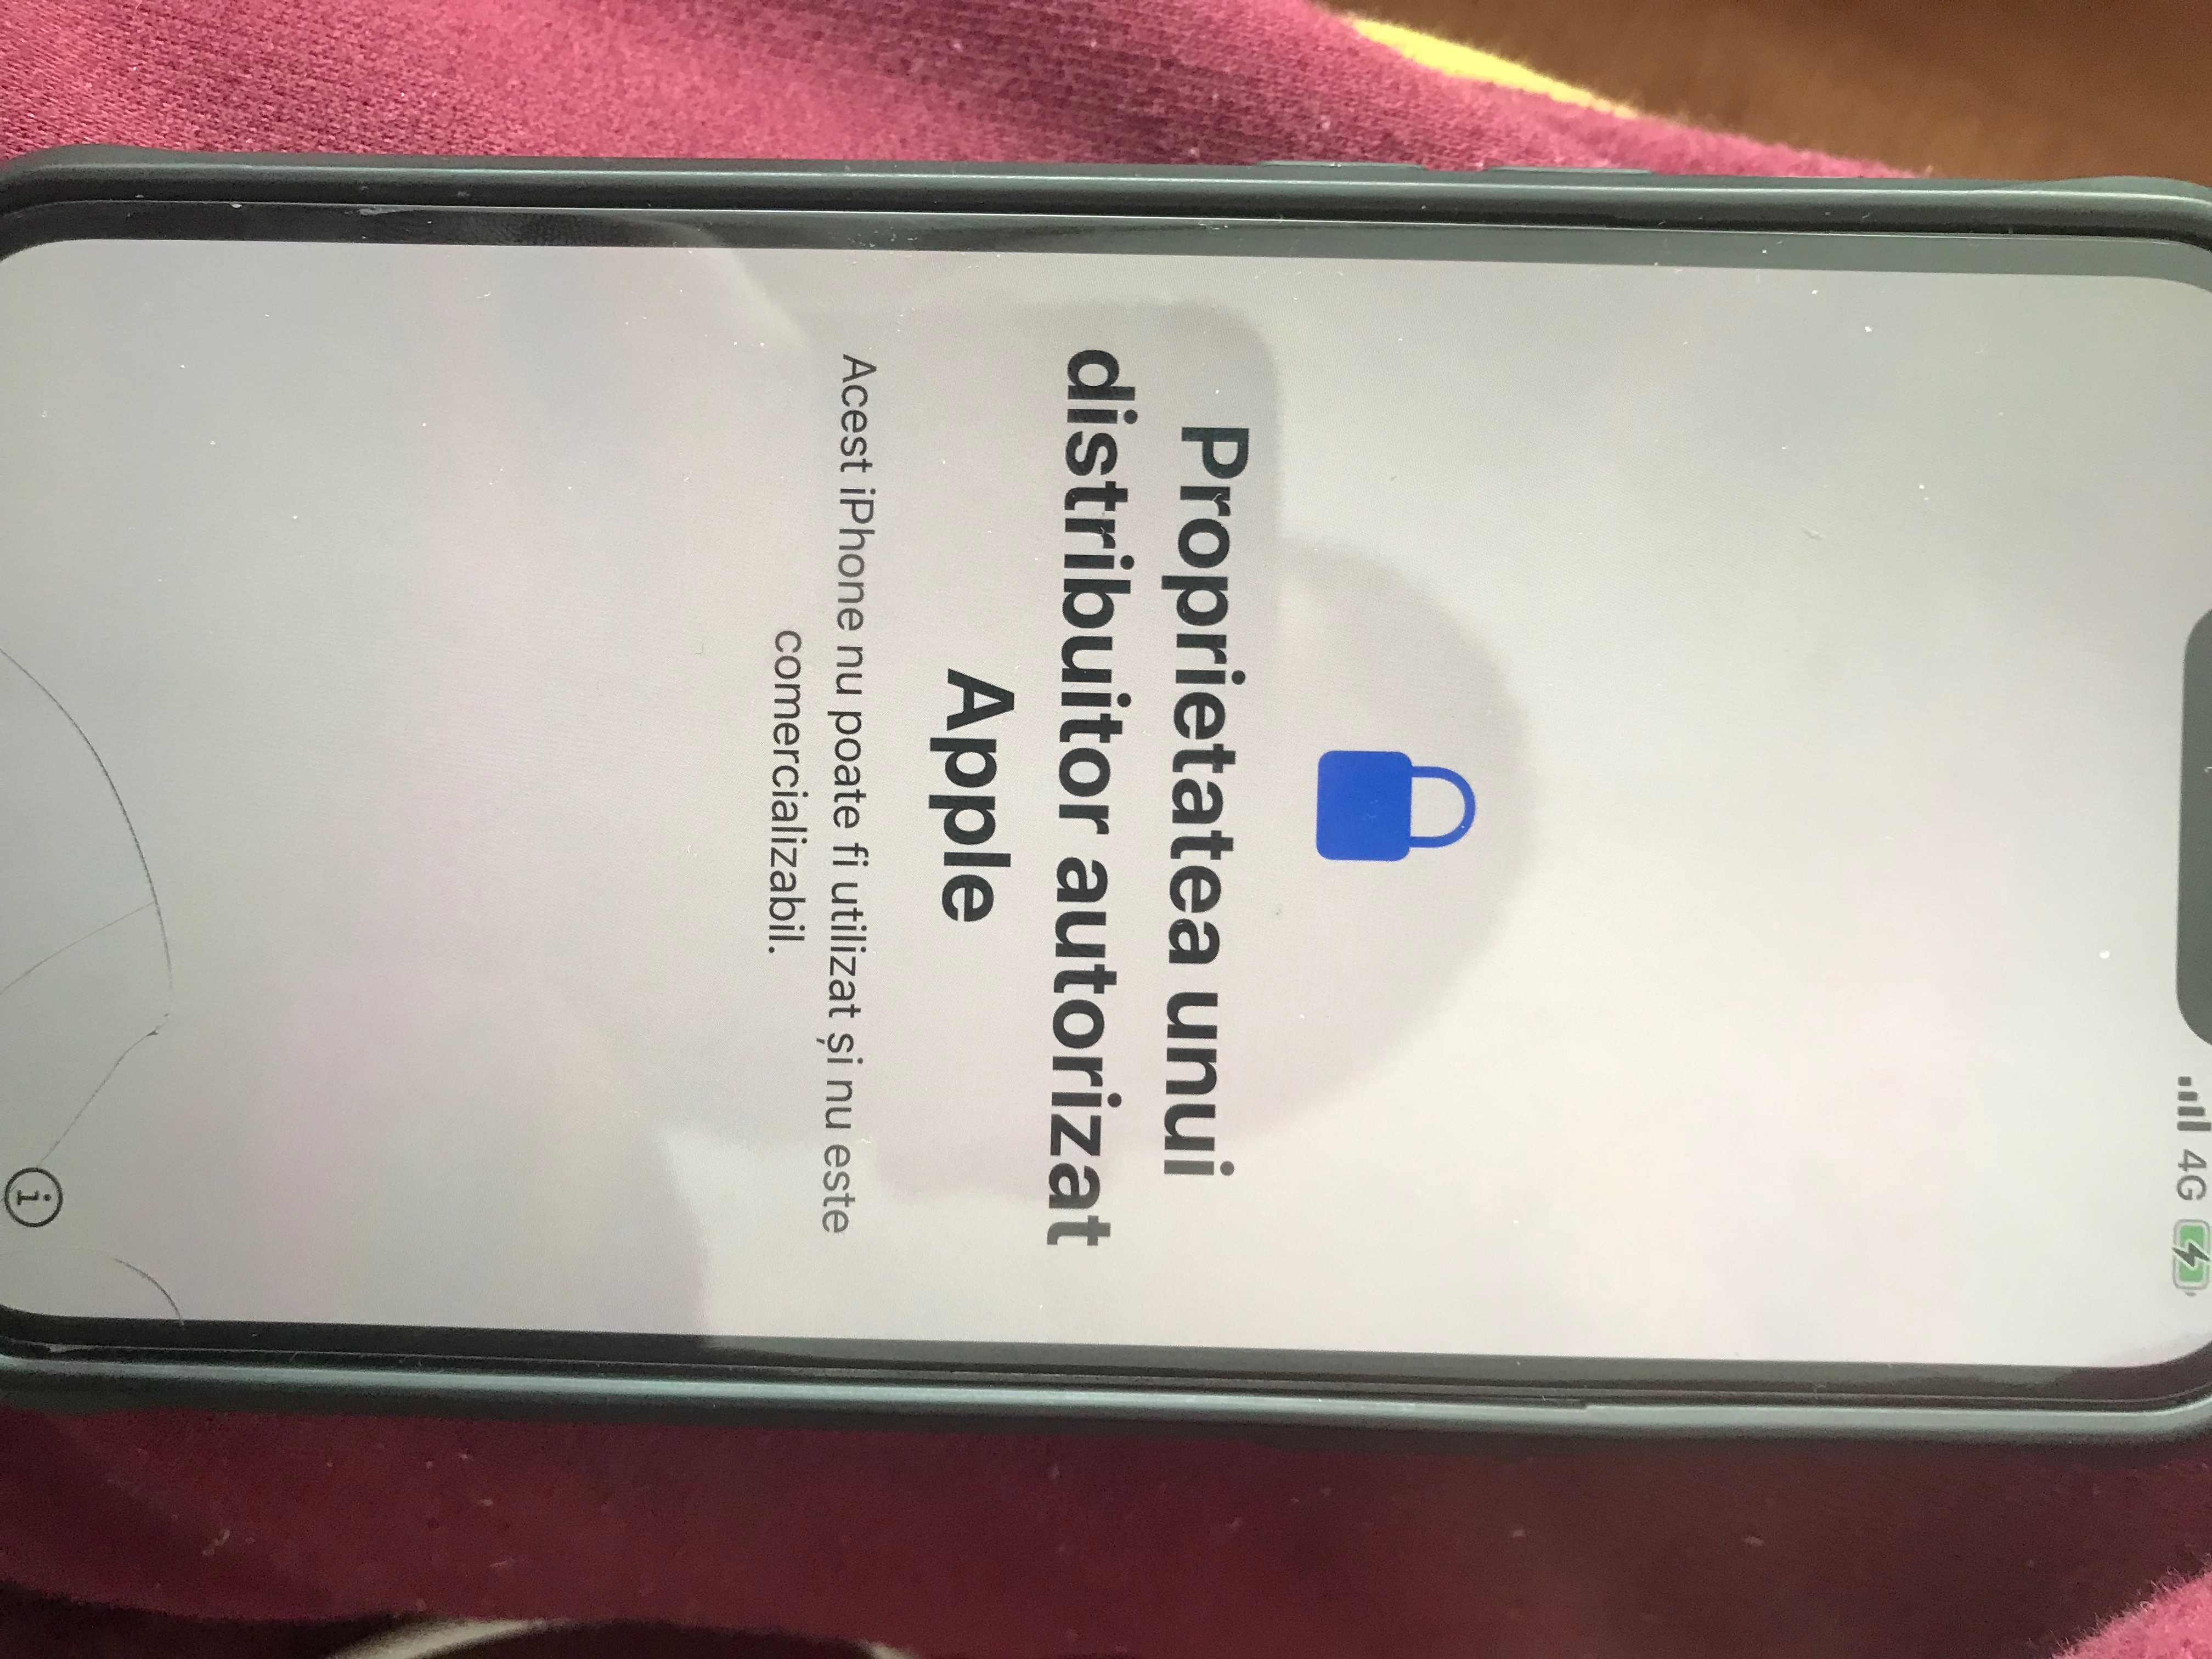 iPhone 11 Pro with damaged/cracked rear p… - Apple Community